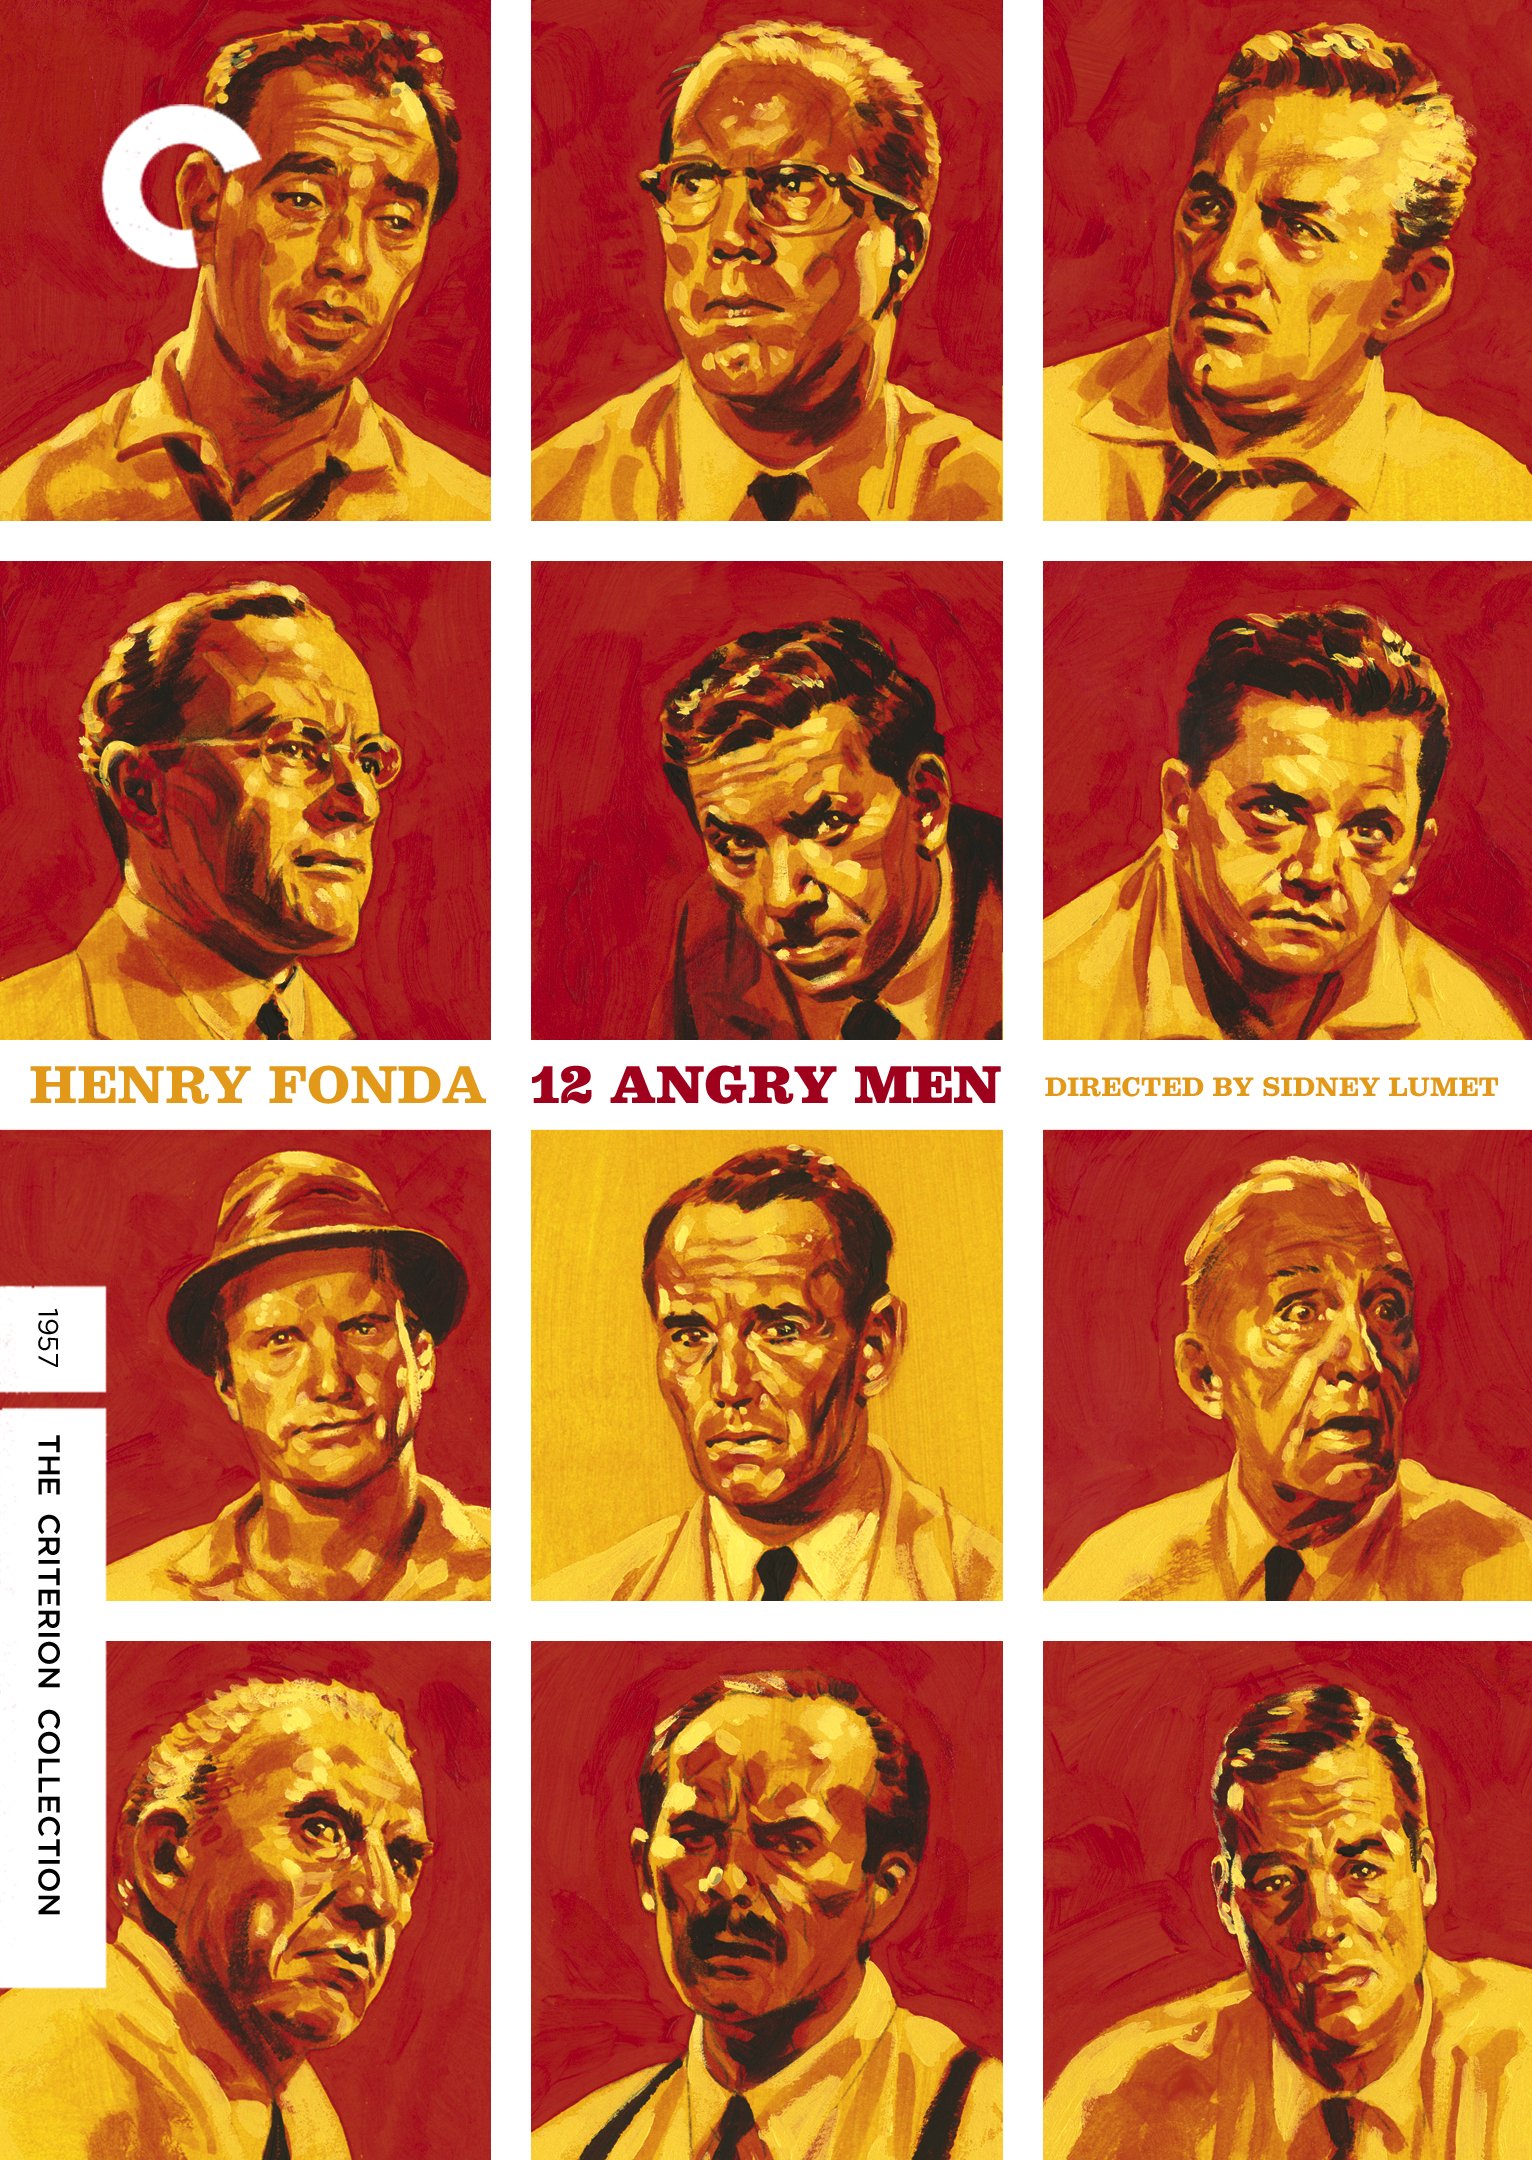 1957 12 Angry Men movie poster